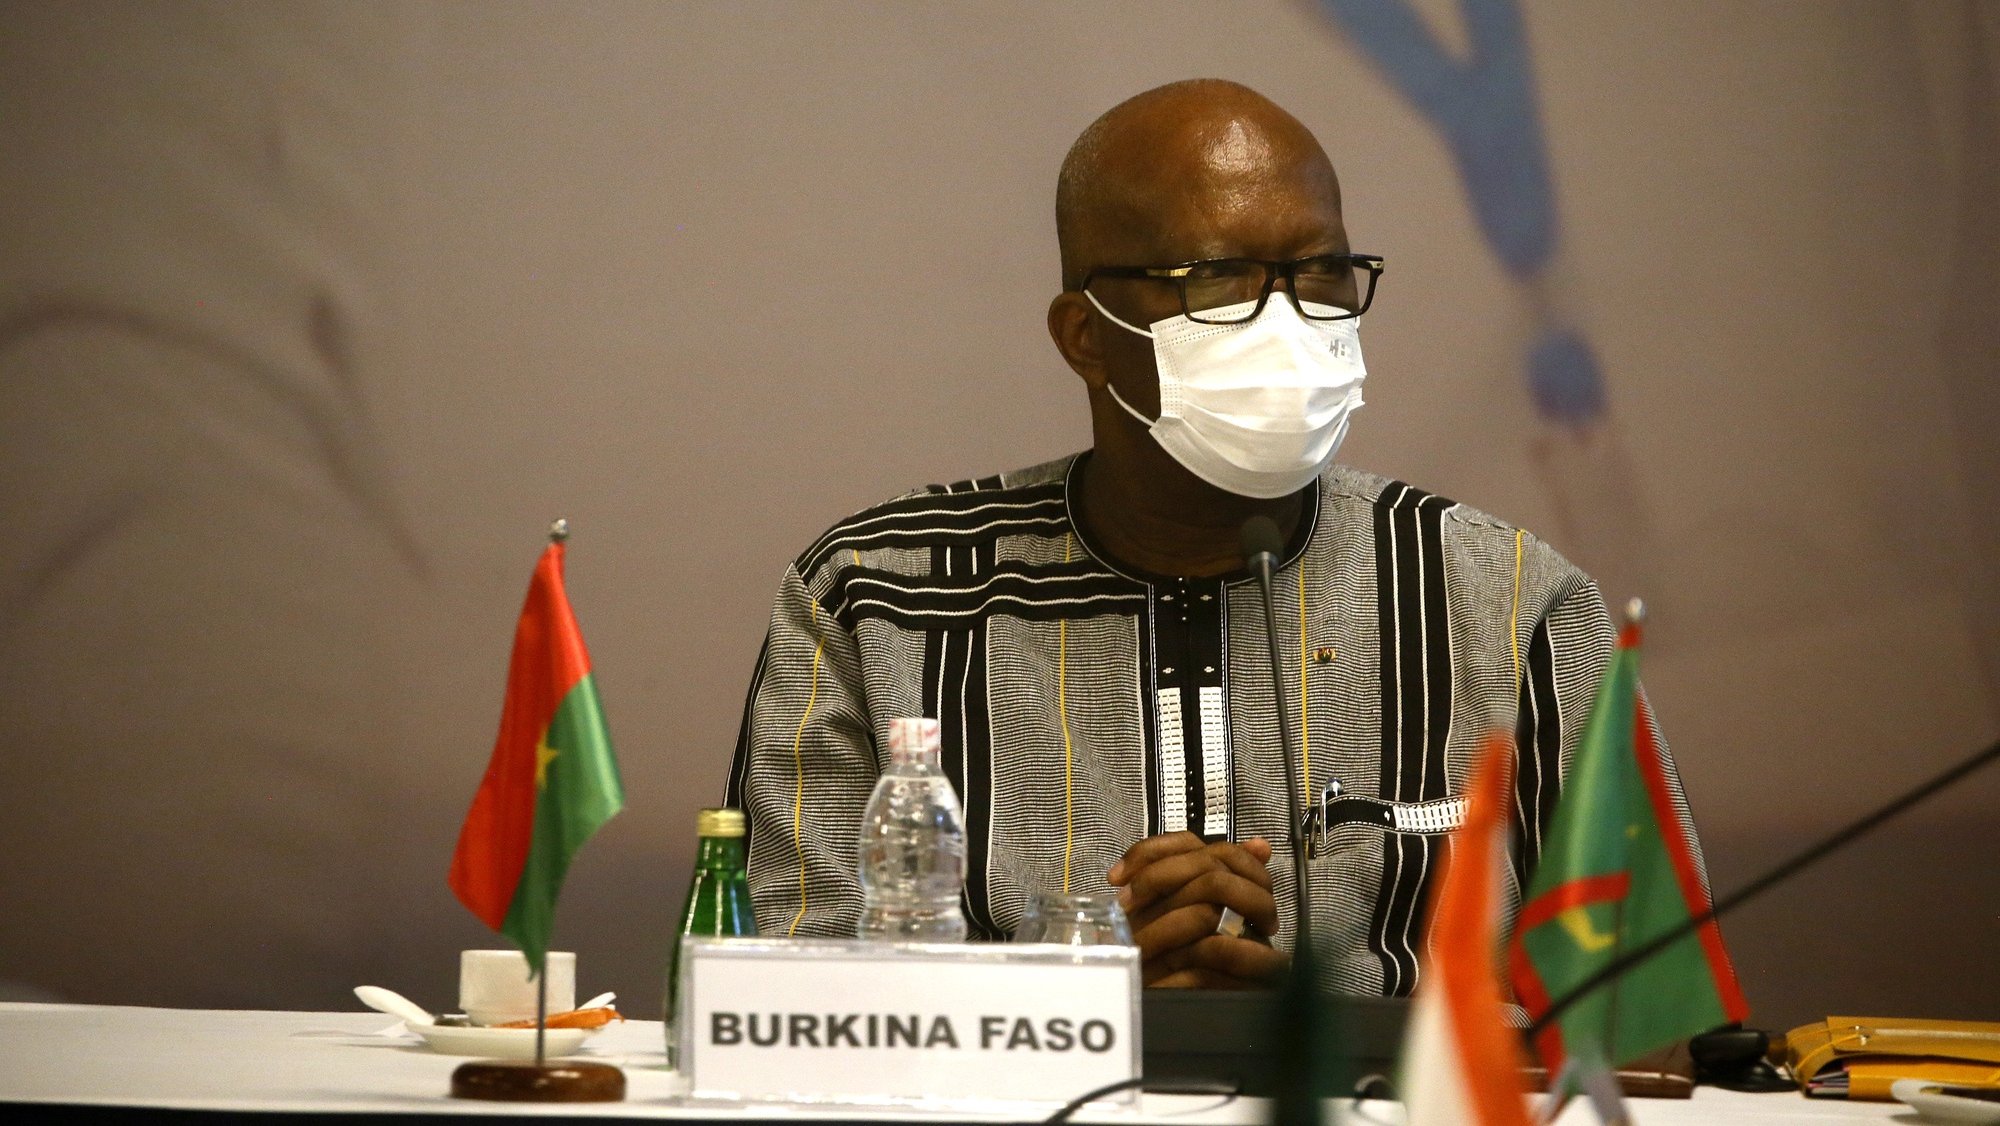 epa09346993 Burkinabe President Roch Marc Christian Kabore attends the summit of the International Development Association (IDA) in Abidjan, Ivory Coast, 15 July 2021. The event is attended by several African heads of state.  EPA/LEGNAN KOULA